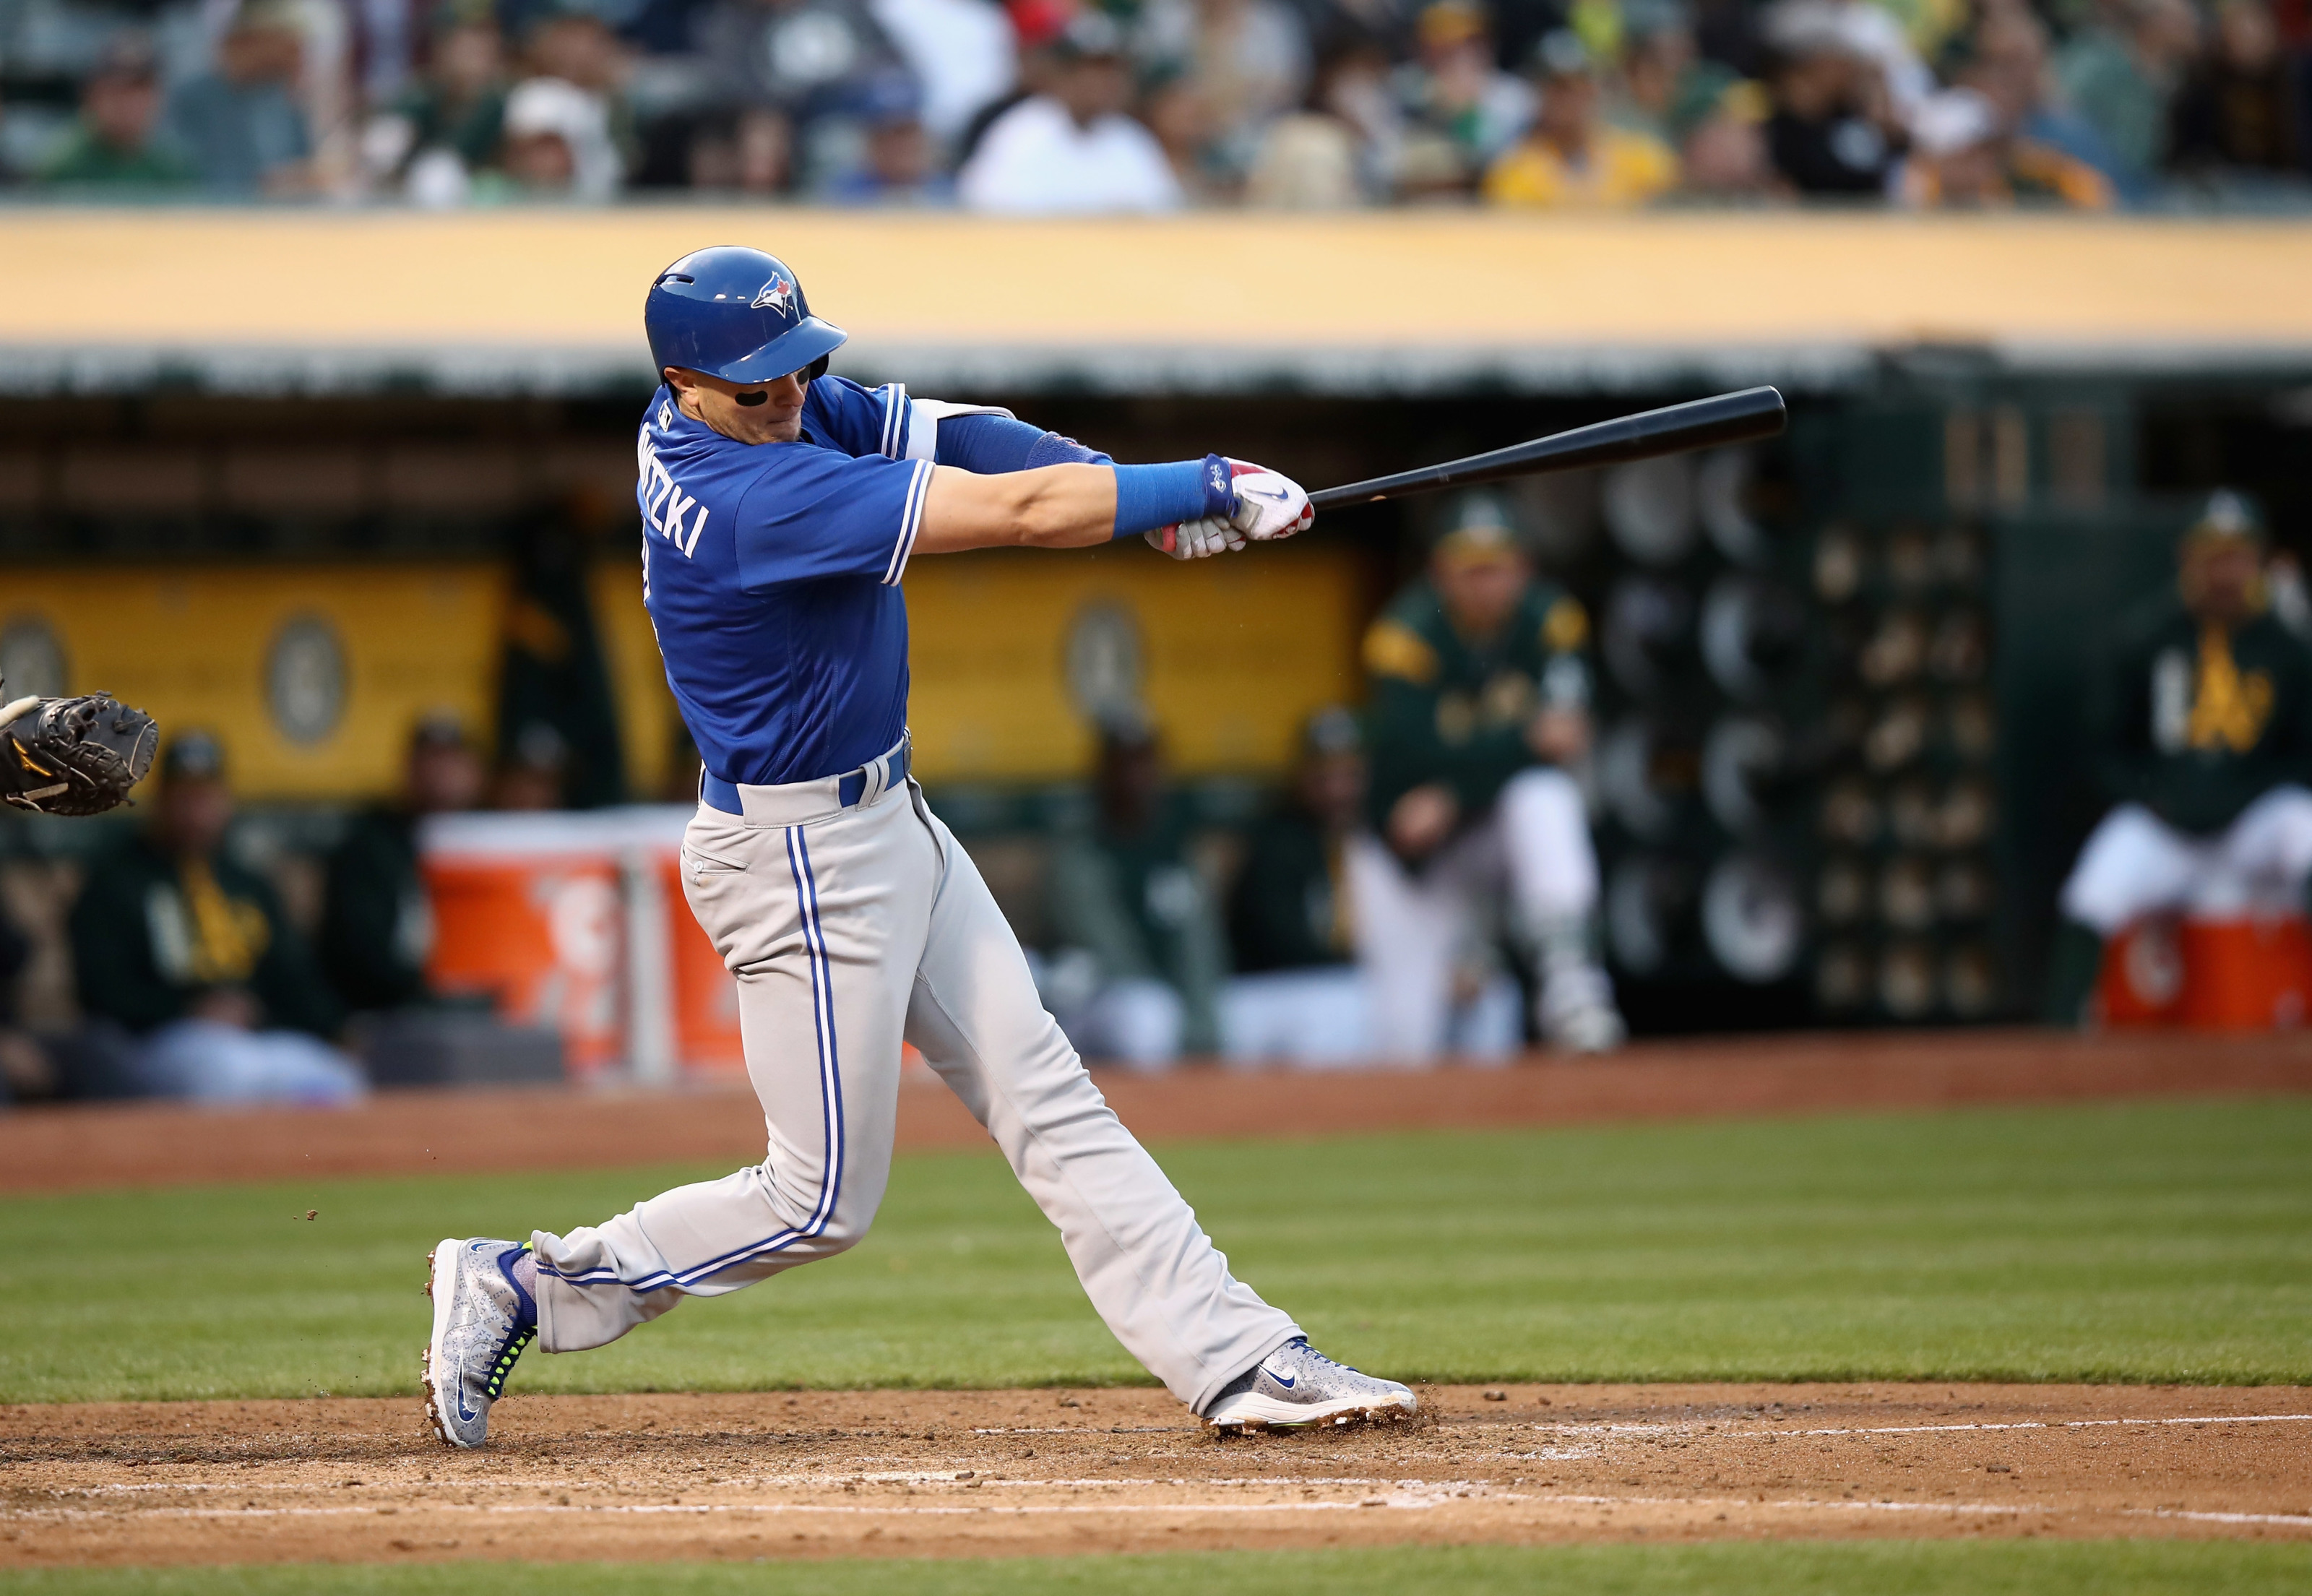 Oakland A's and Troy Tulowitzki would be a perfect match